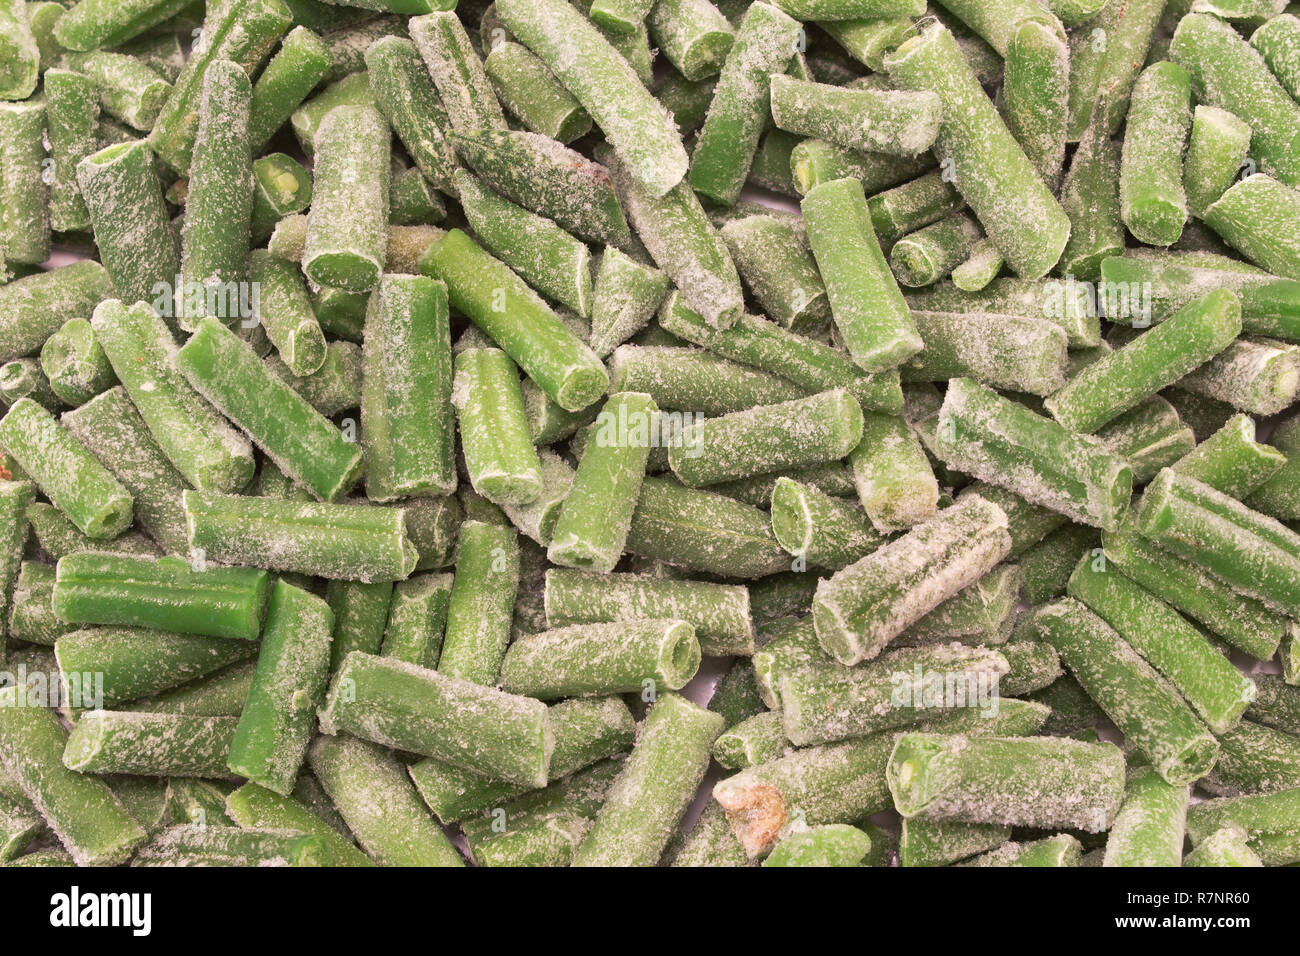 Frozen green beans vegetable as background Stock Photo